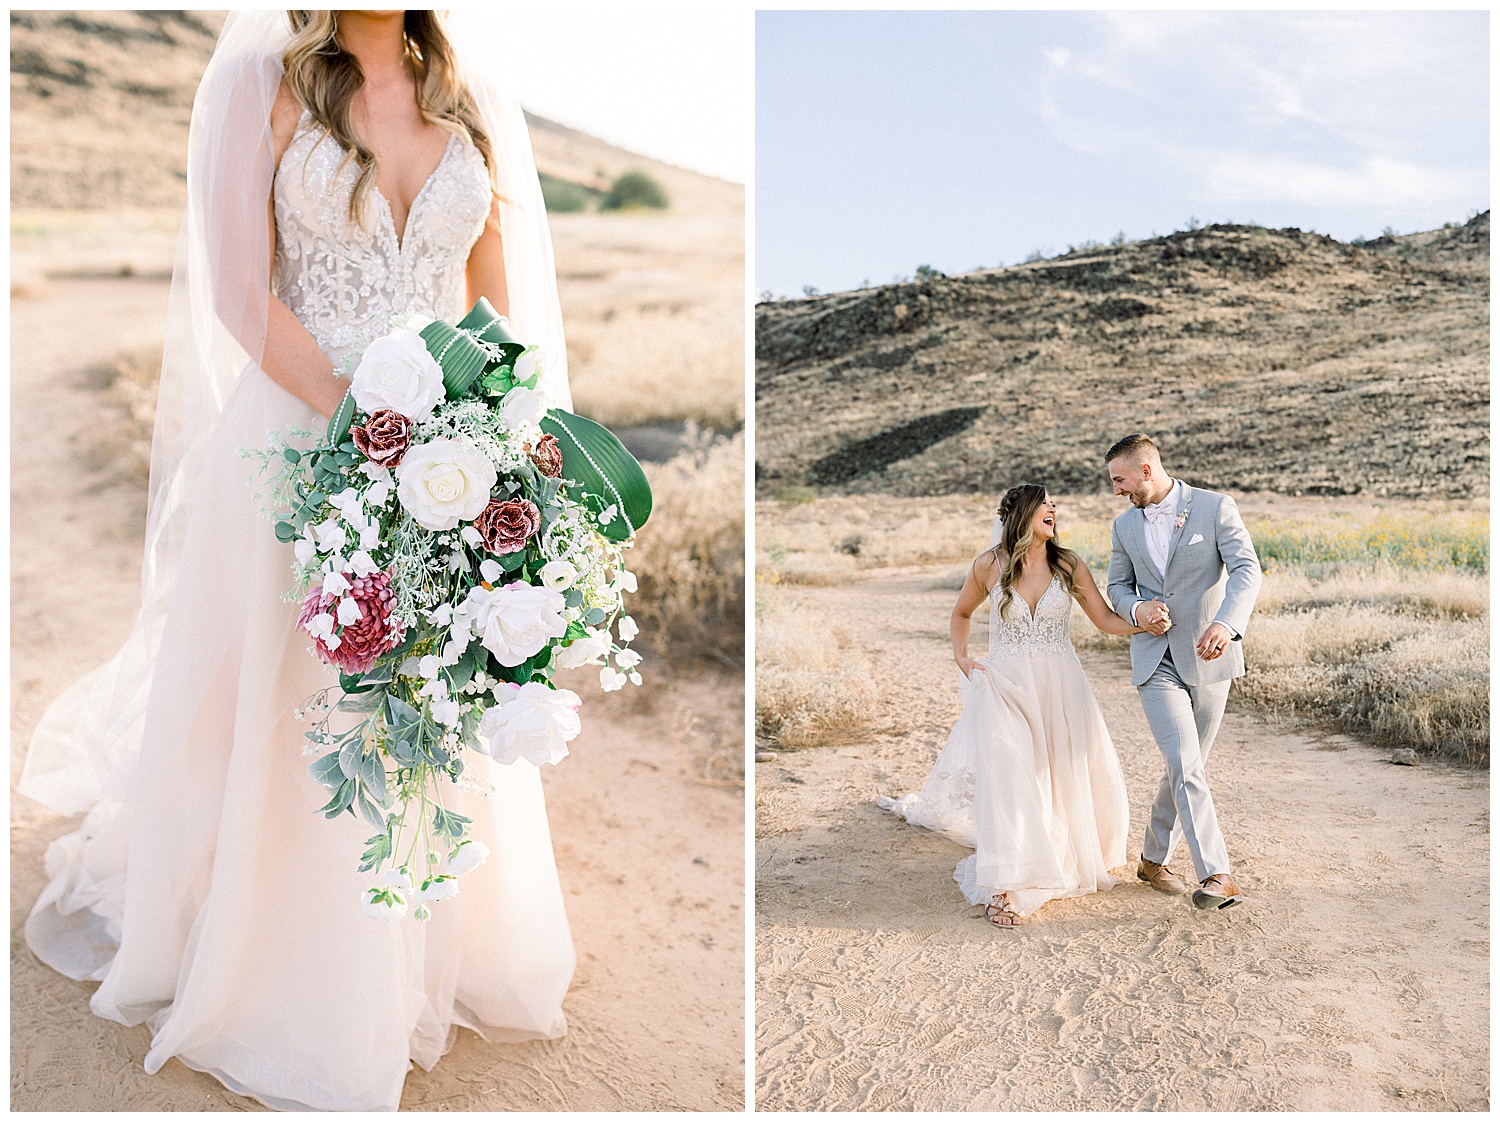 Husband and Wife portraits in the desert for an intimate estate wedding, Arizona